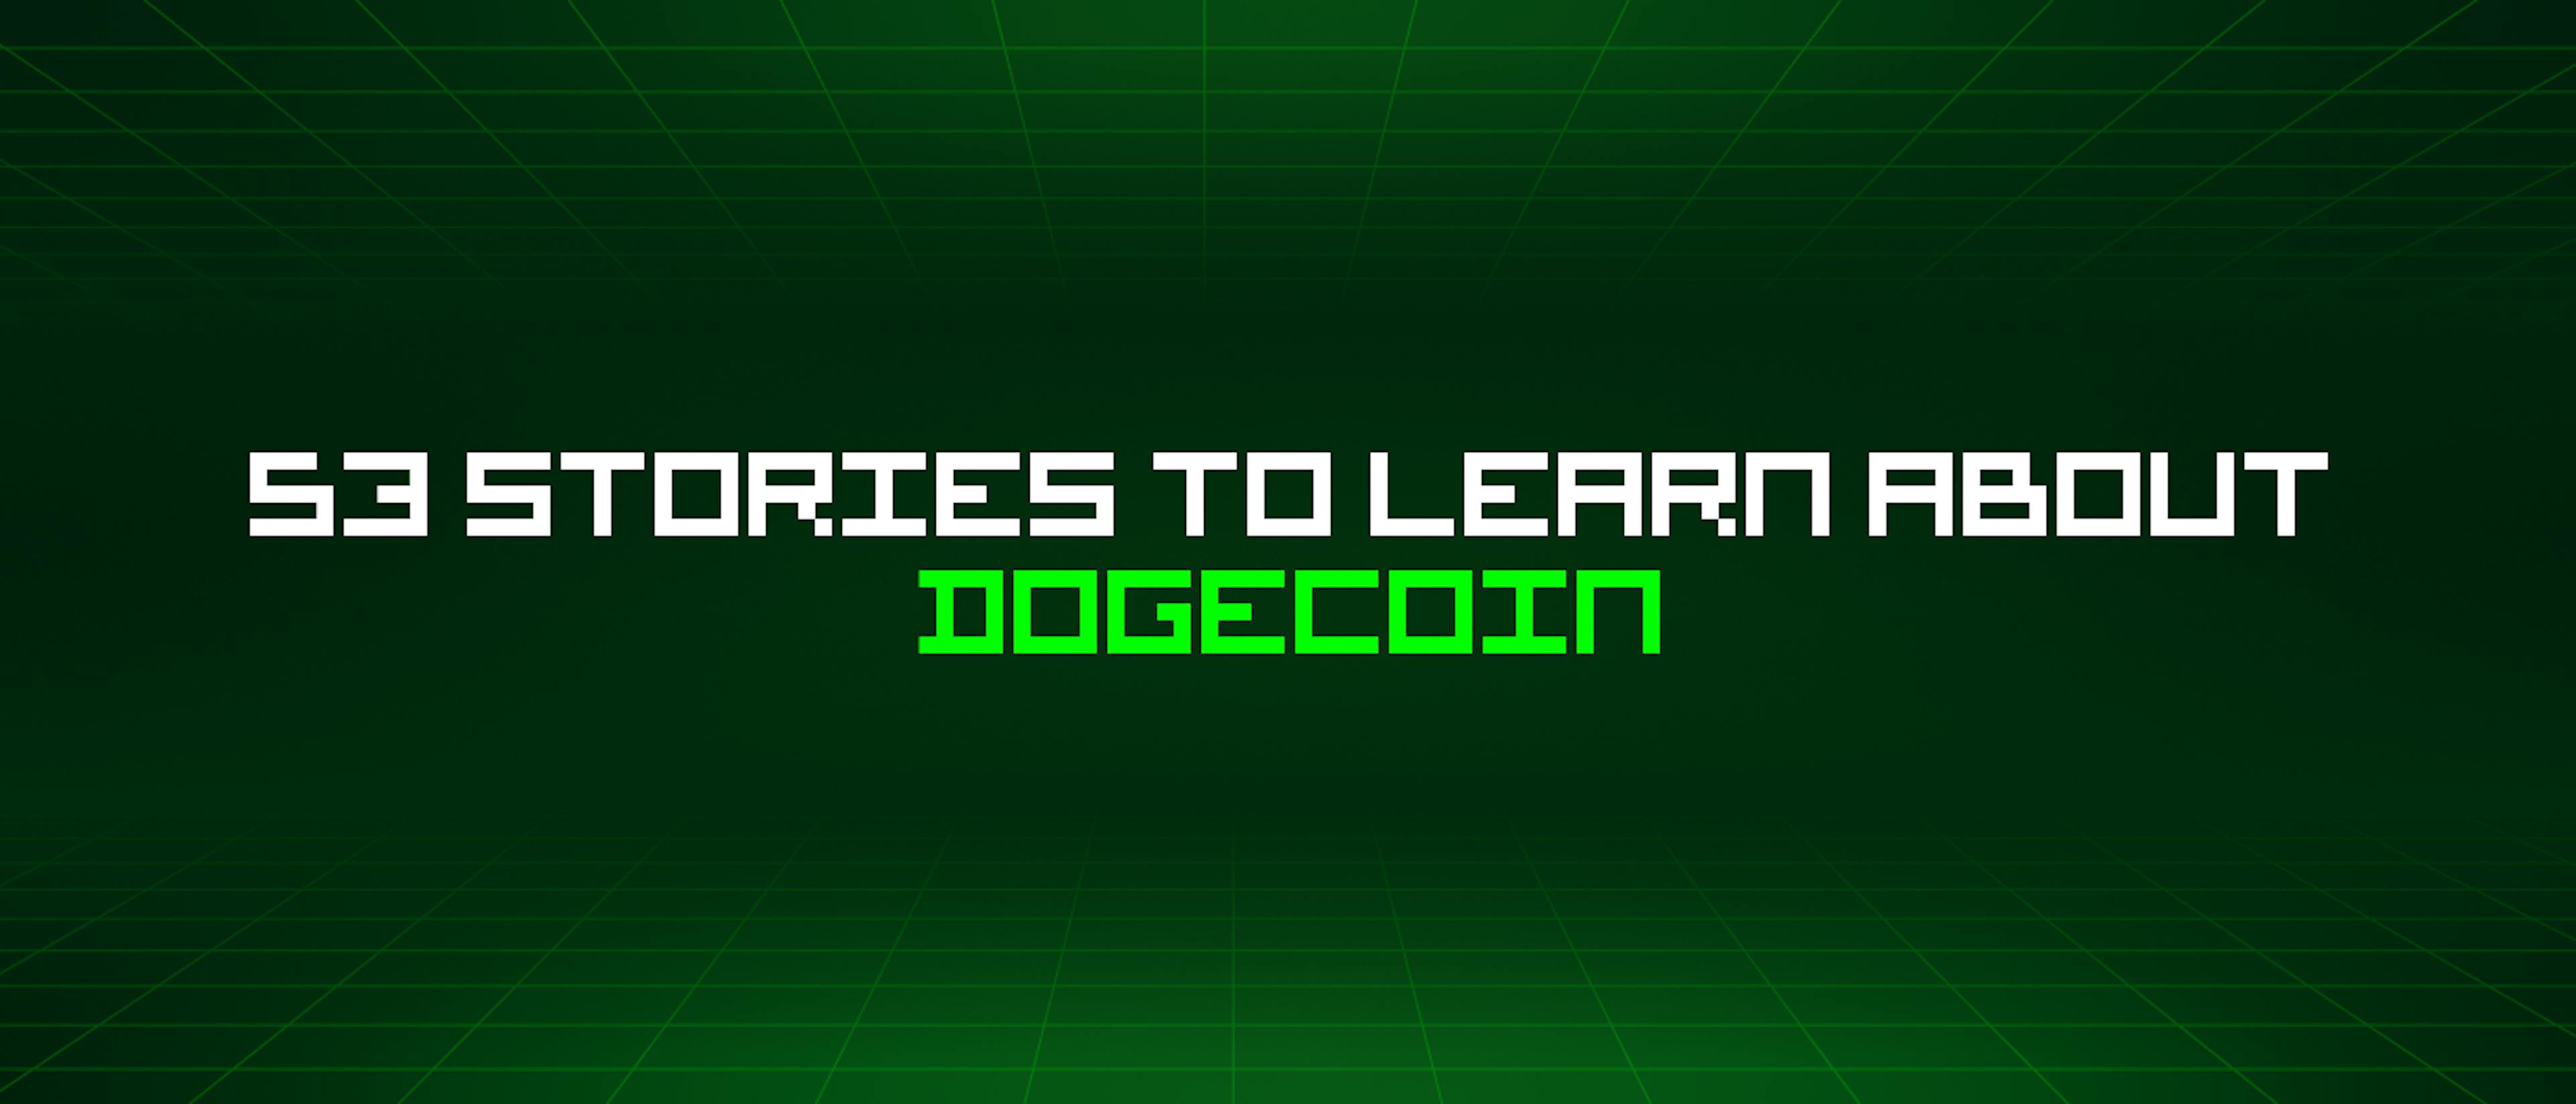 /53-stories-to-learn-about-dogecoin feature image